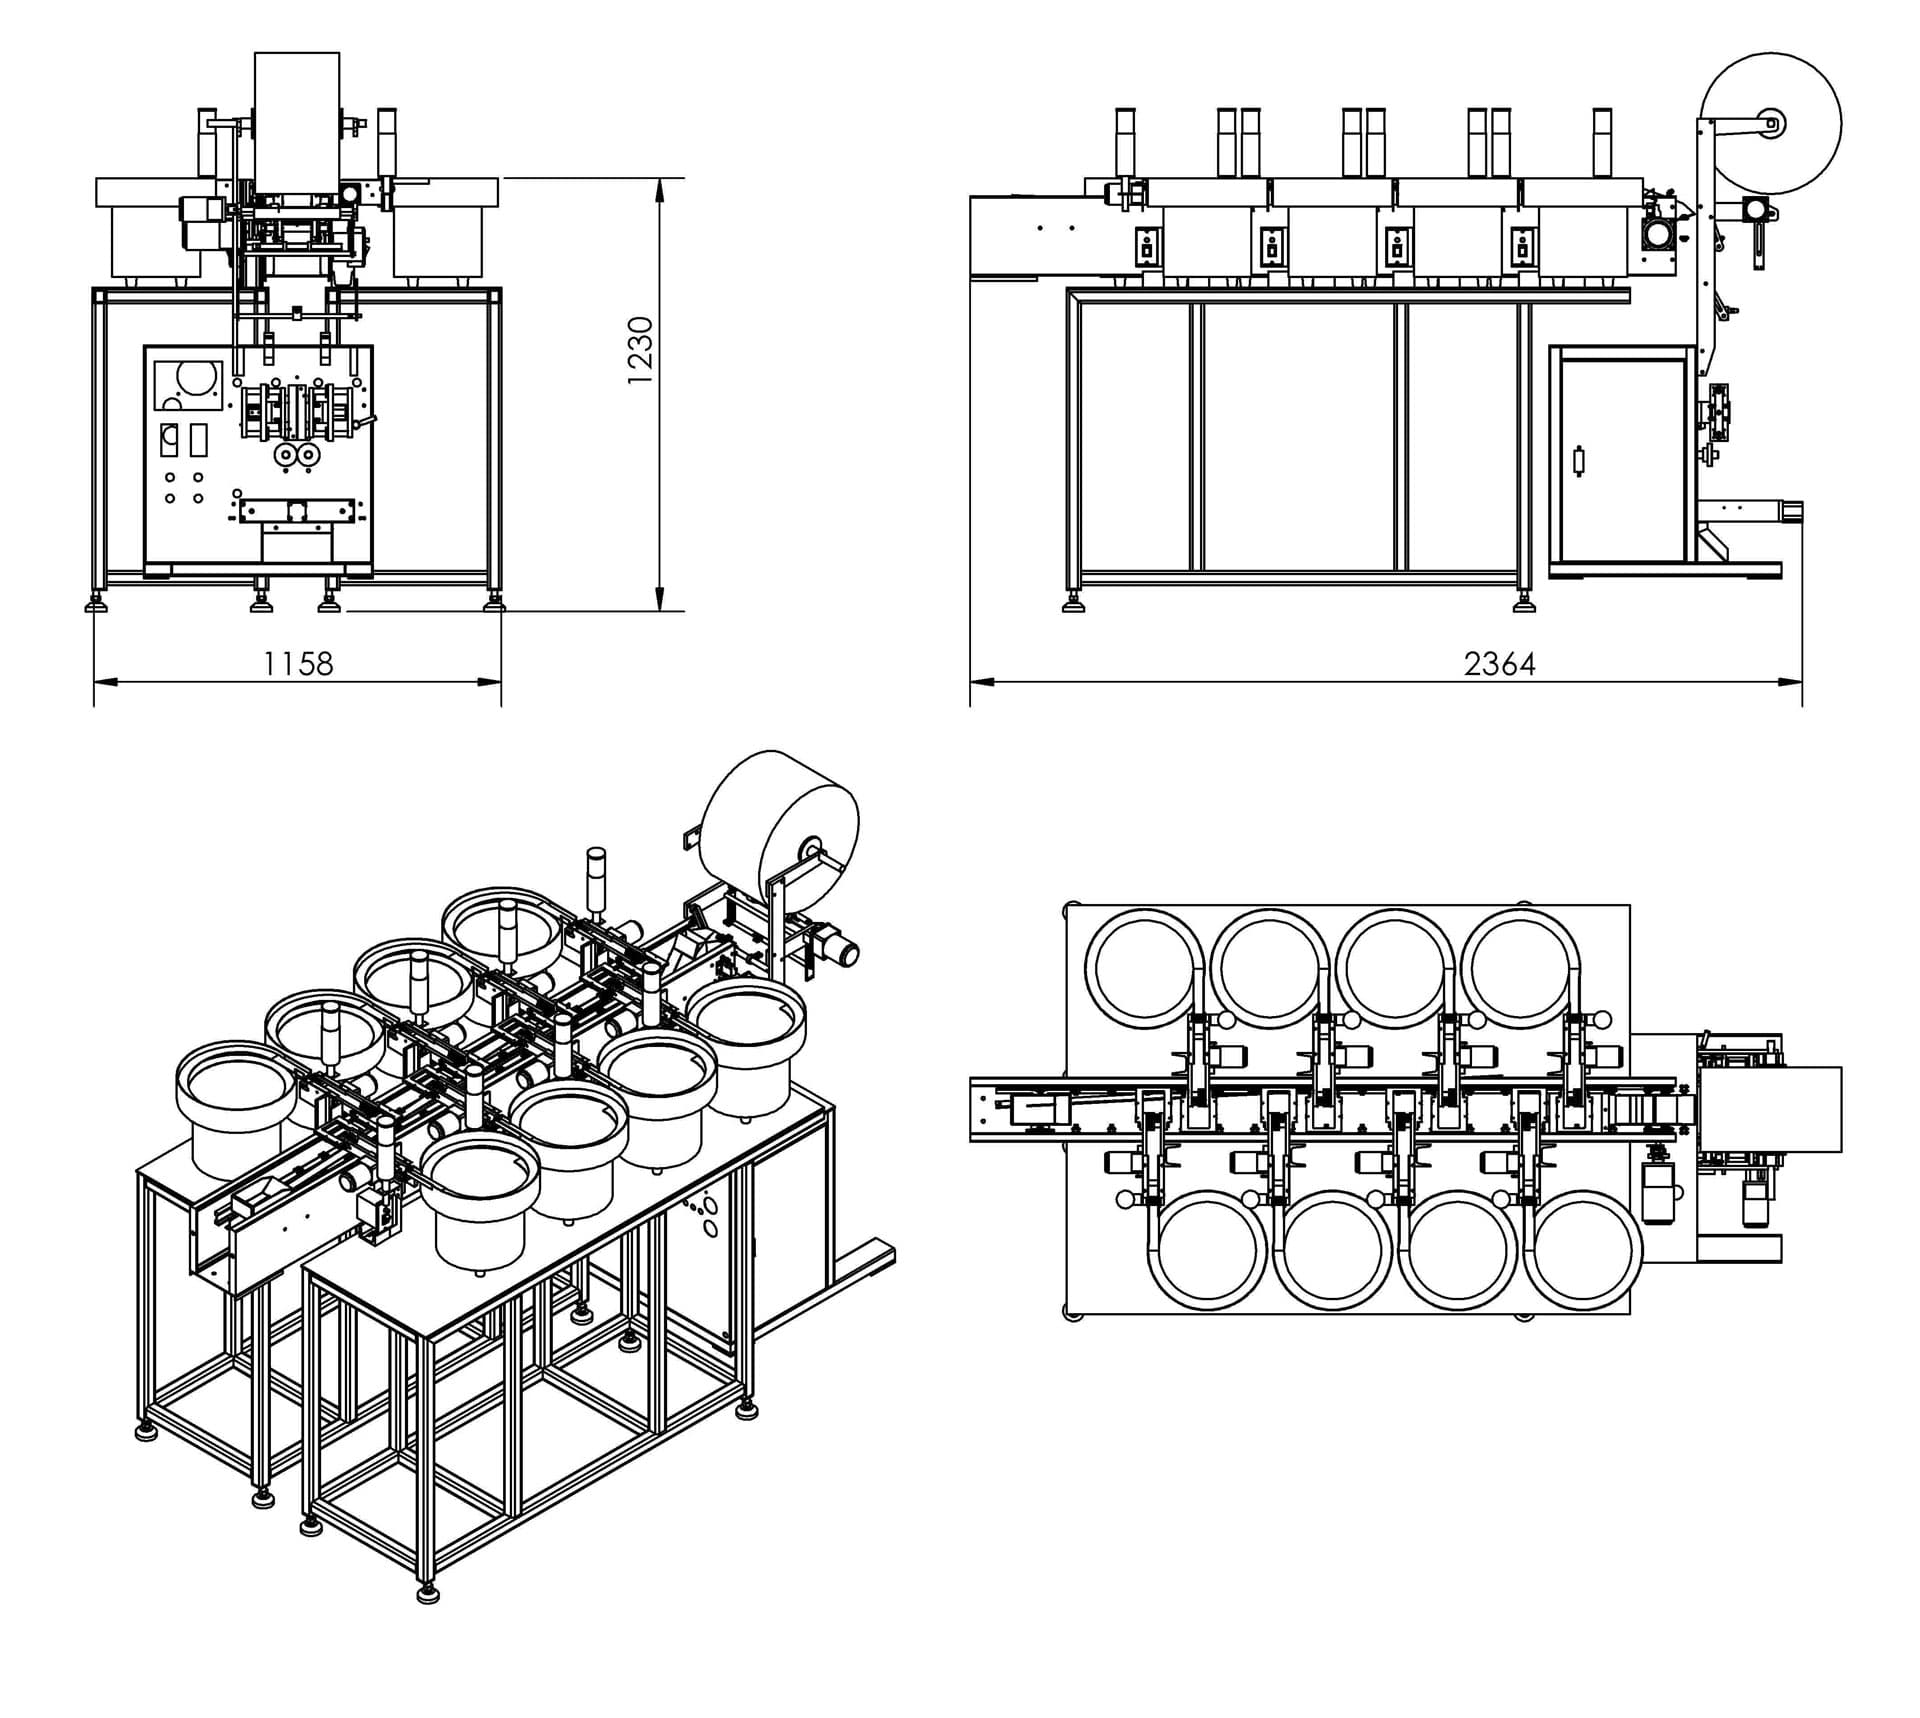 Overall dimensions of packaging equipment